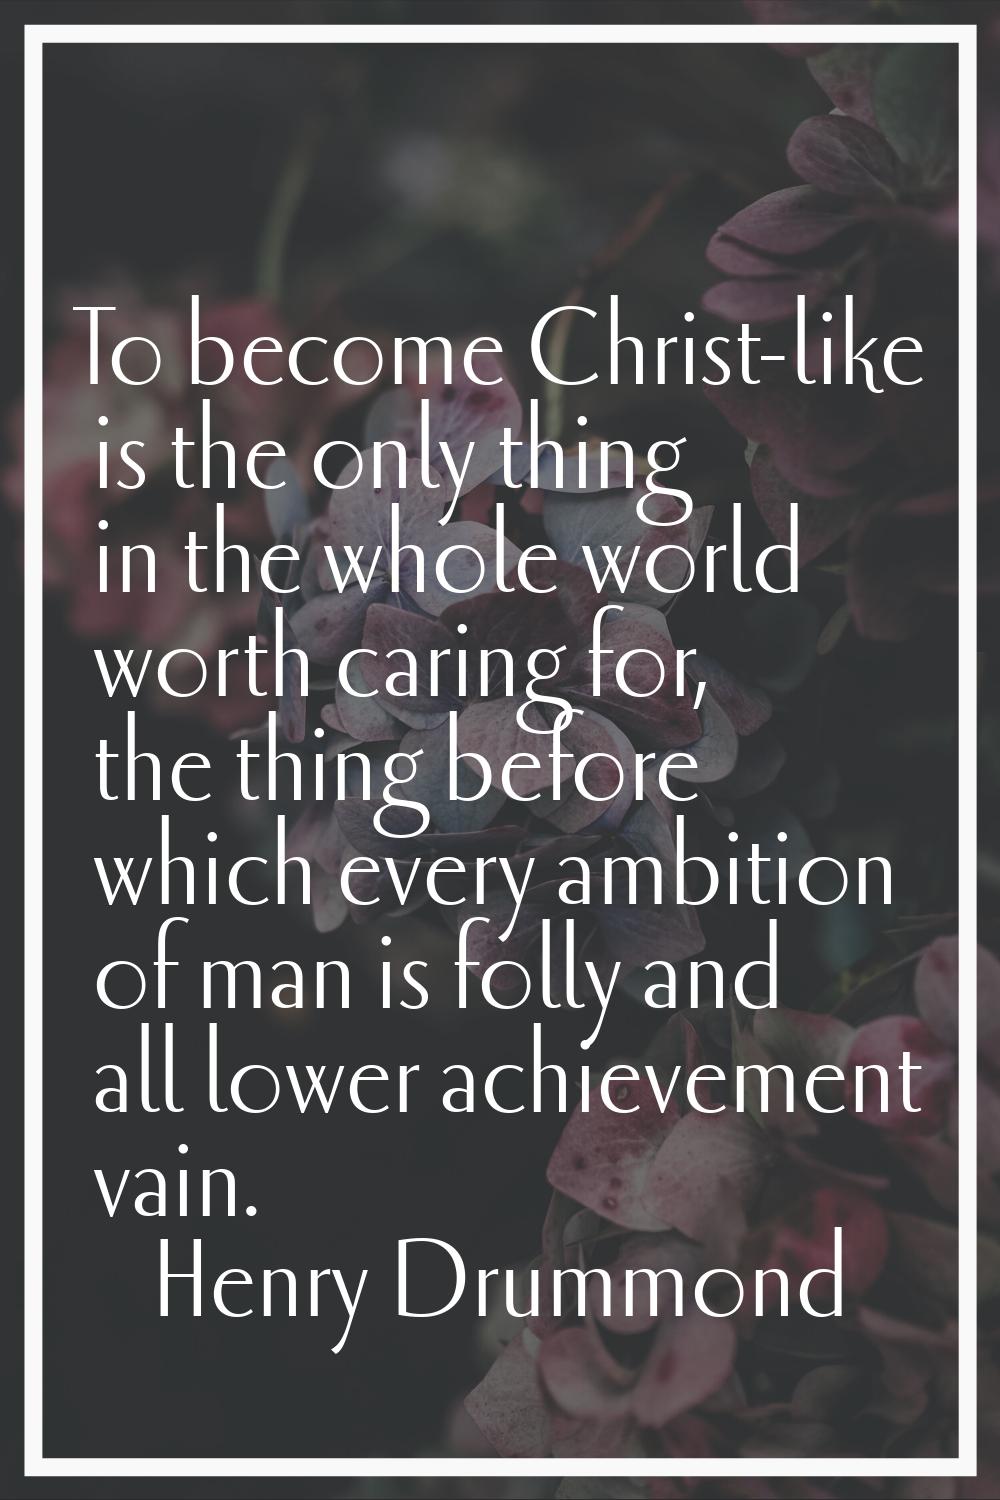 To become Christ-like is the only thing in the whole world worth caring for, the thing before which